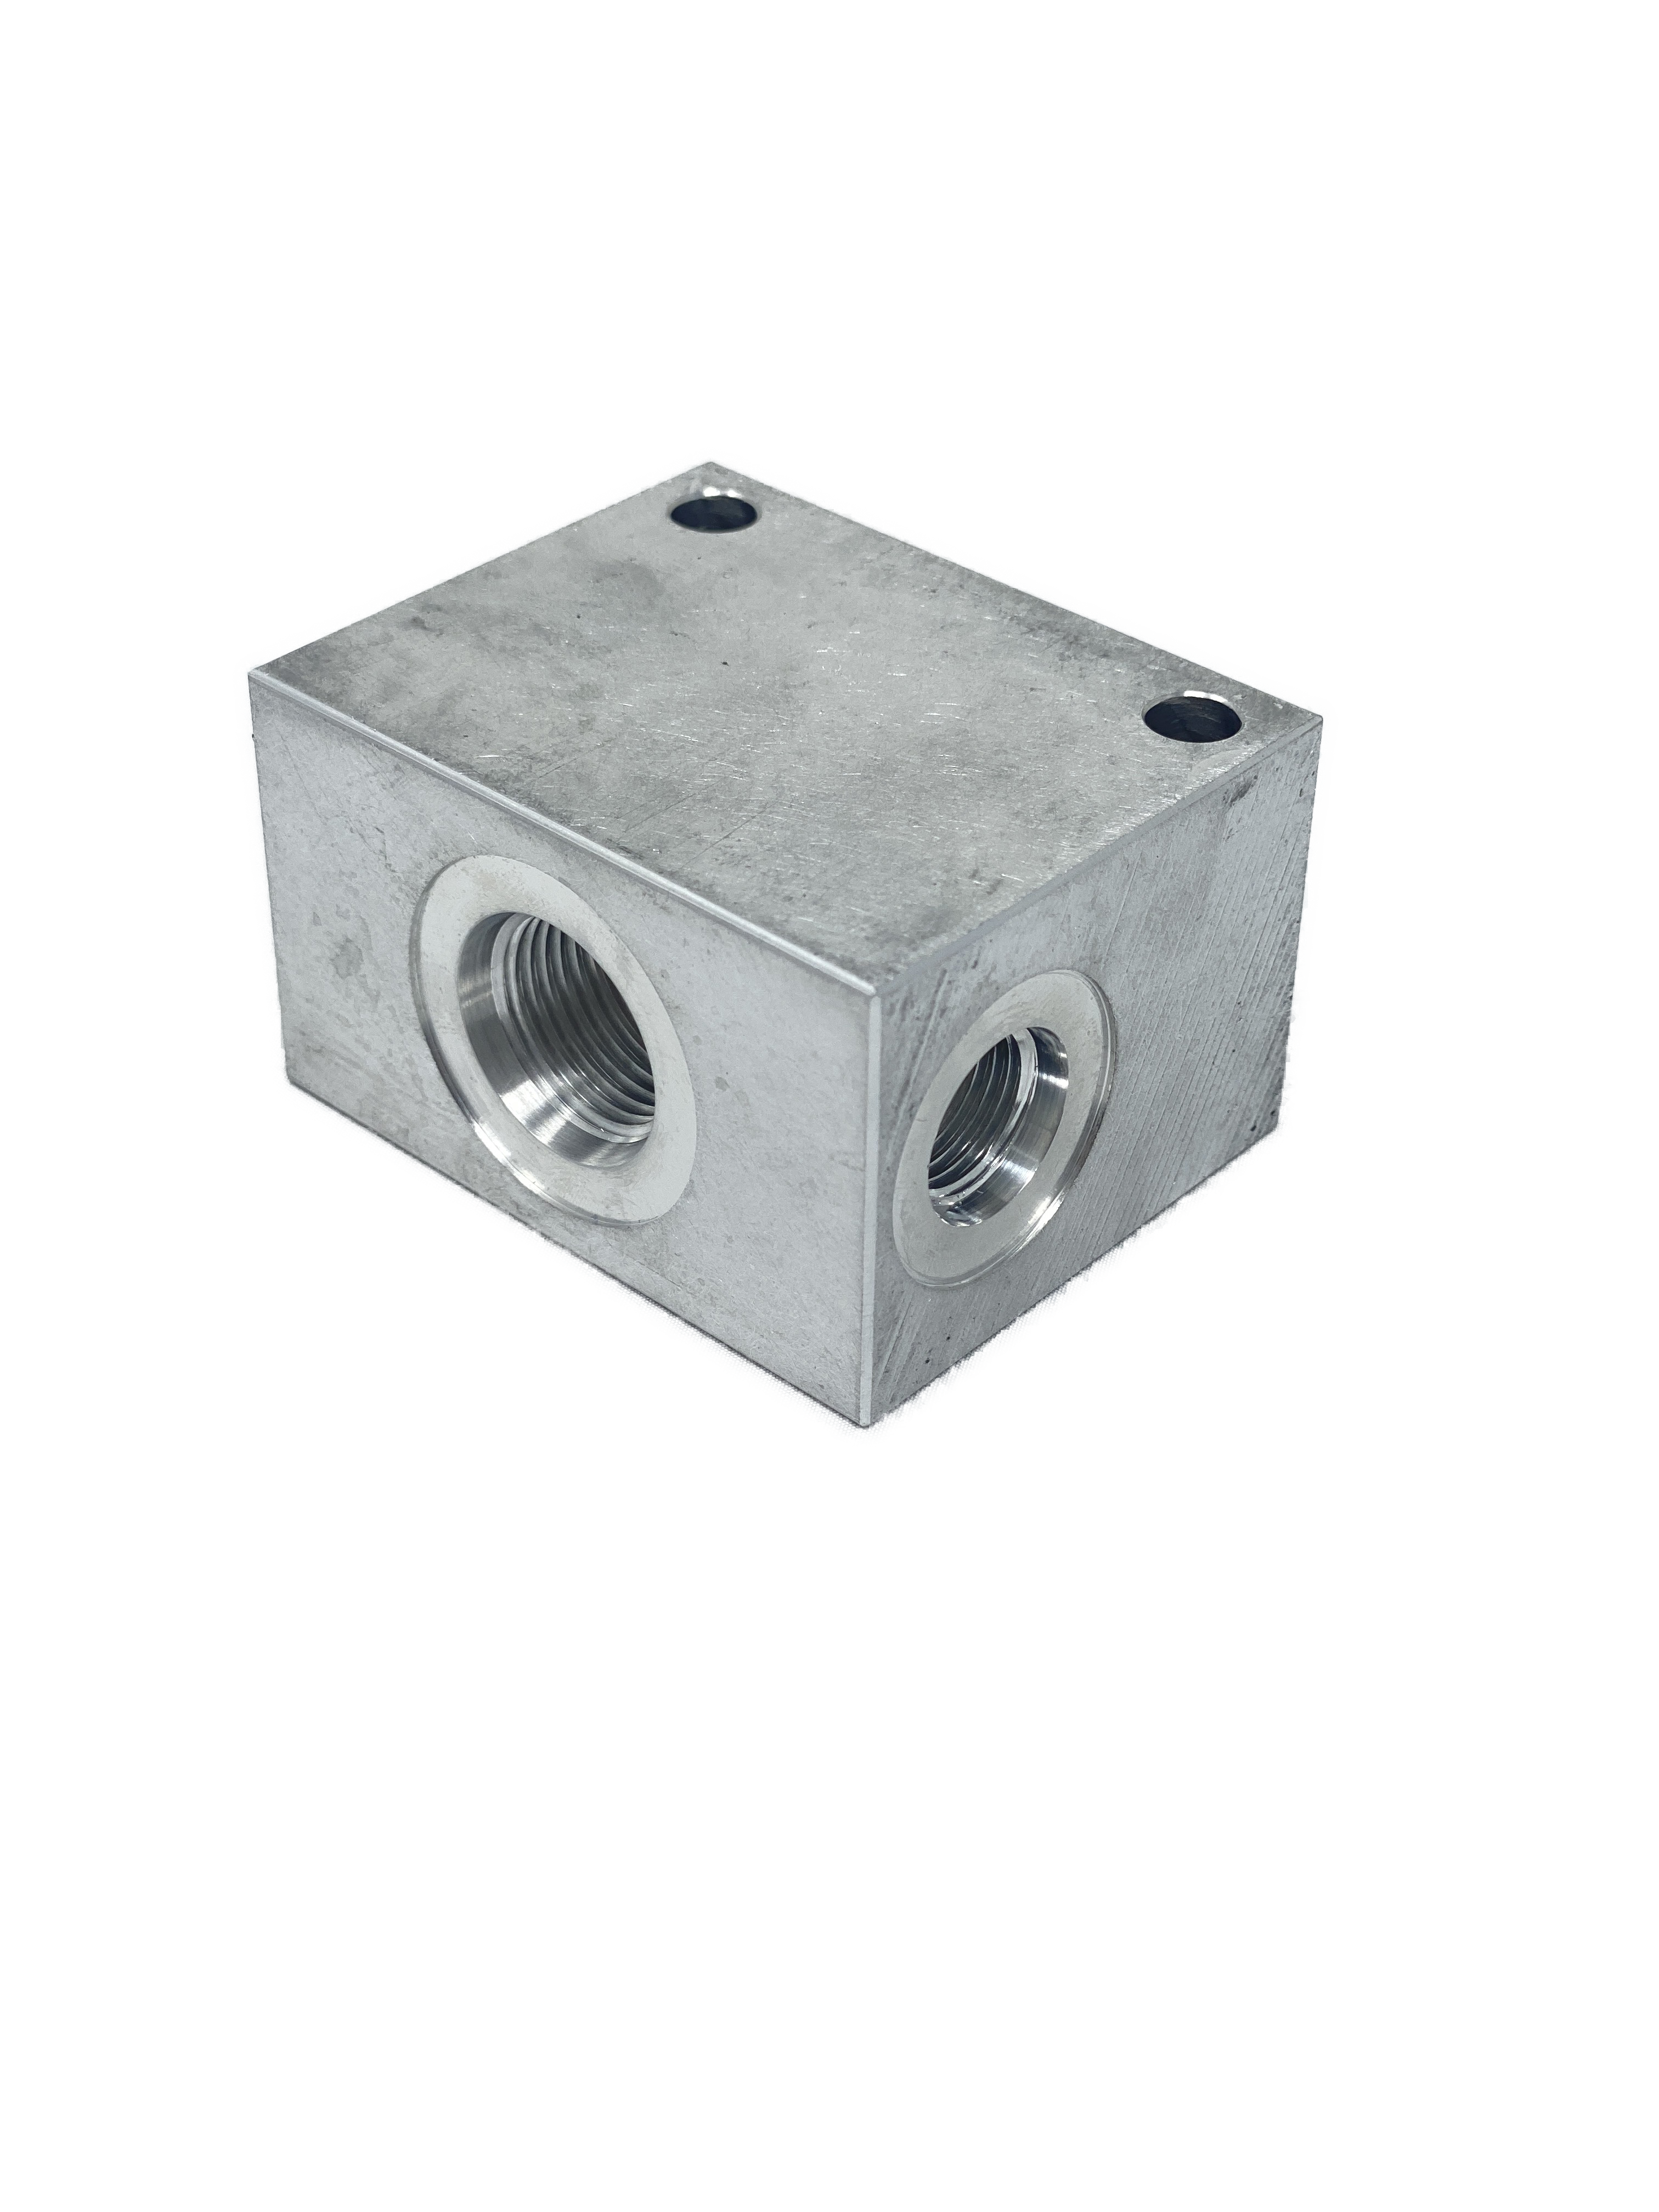 AC082CB8S : Daman Common Cavity Body, C-8-2 Cartridge Cavity, #8 SAE (1/2") Port Connections, 3000psi Rated, Aluminum, Without Gauge Port